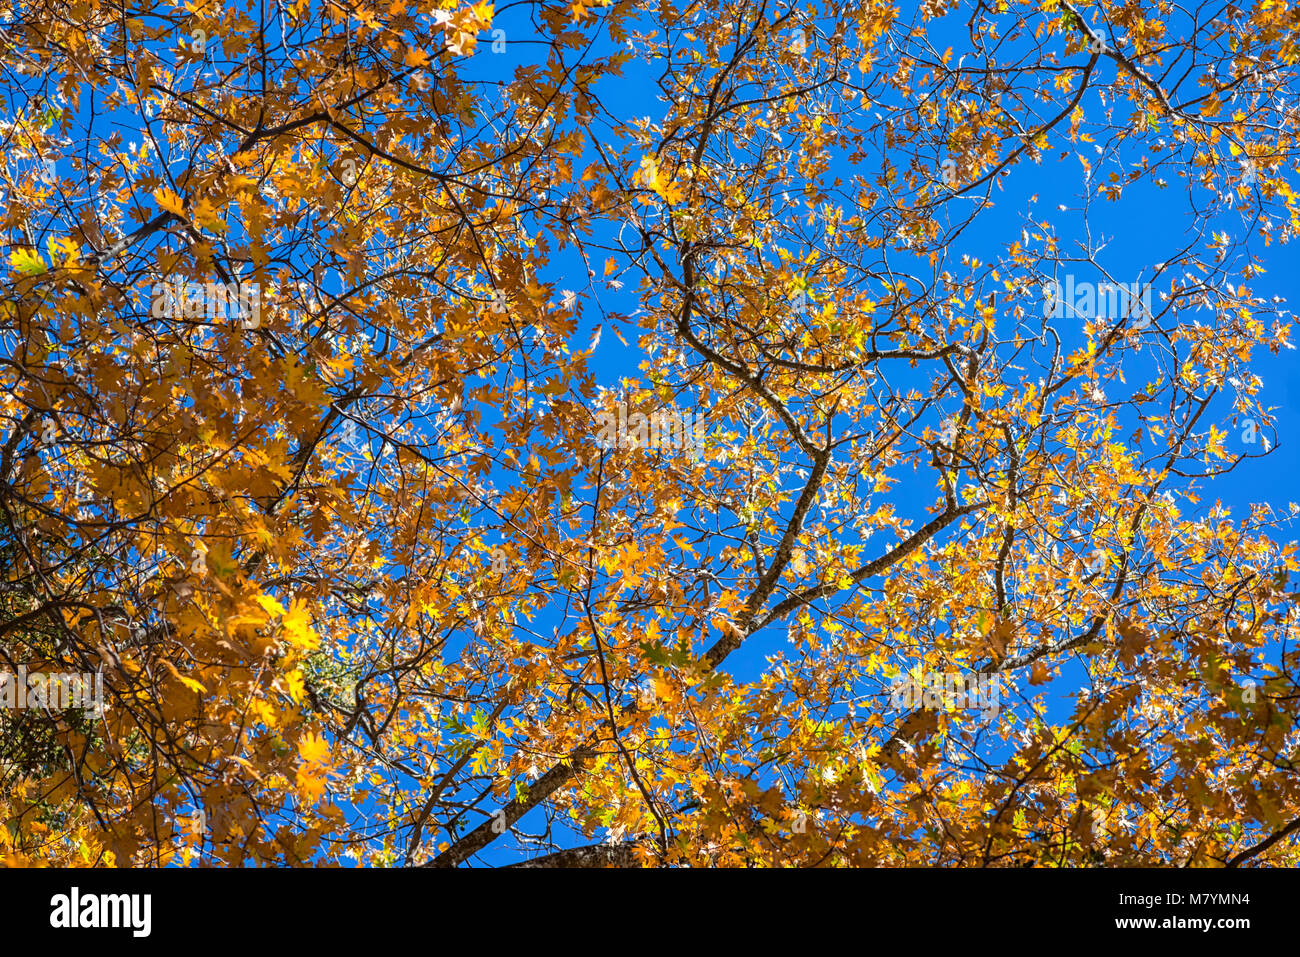 Groups of brown leaves on an Autumn morning. Stock Photo